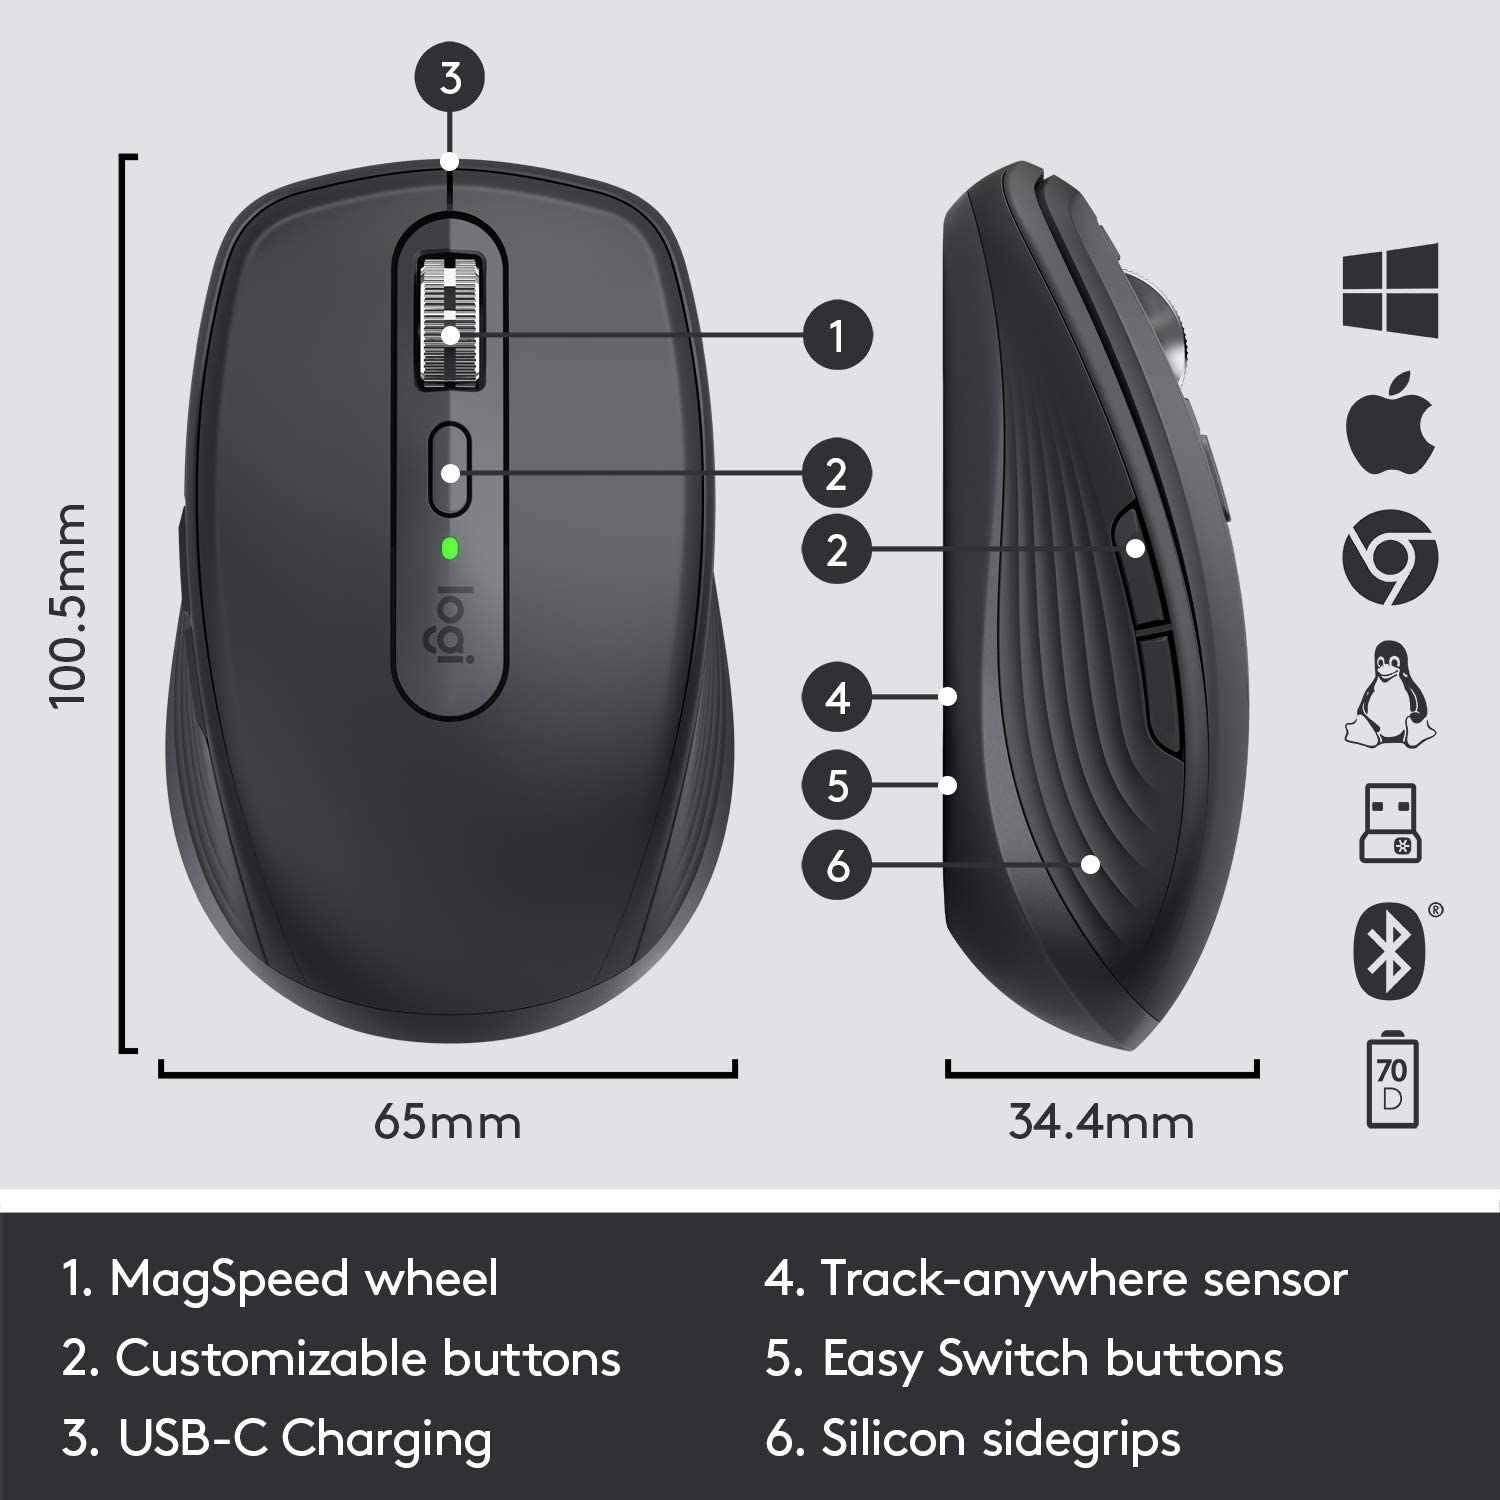 Logitech MX Anywhere features